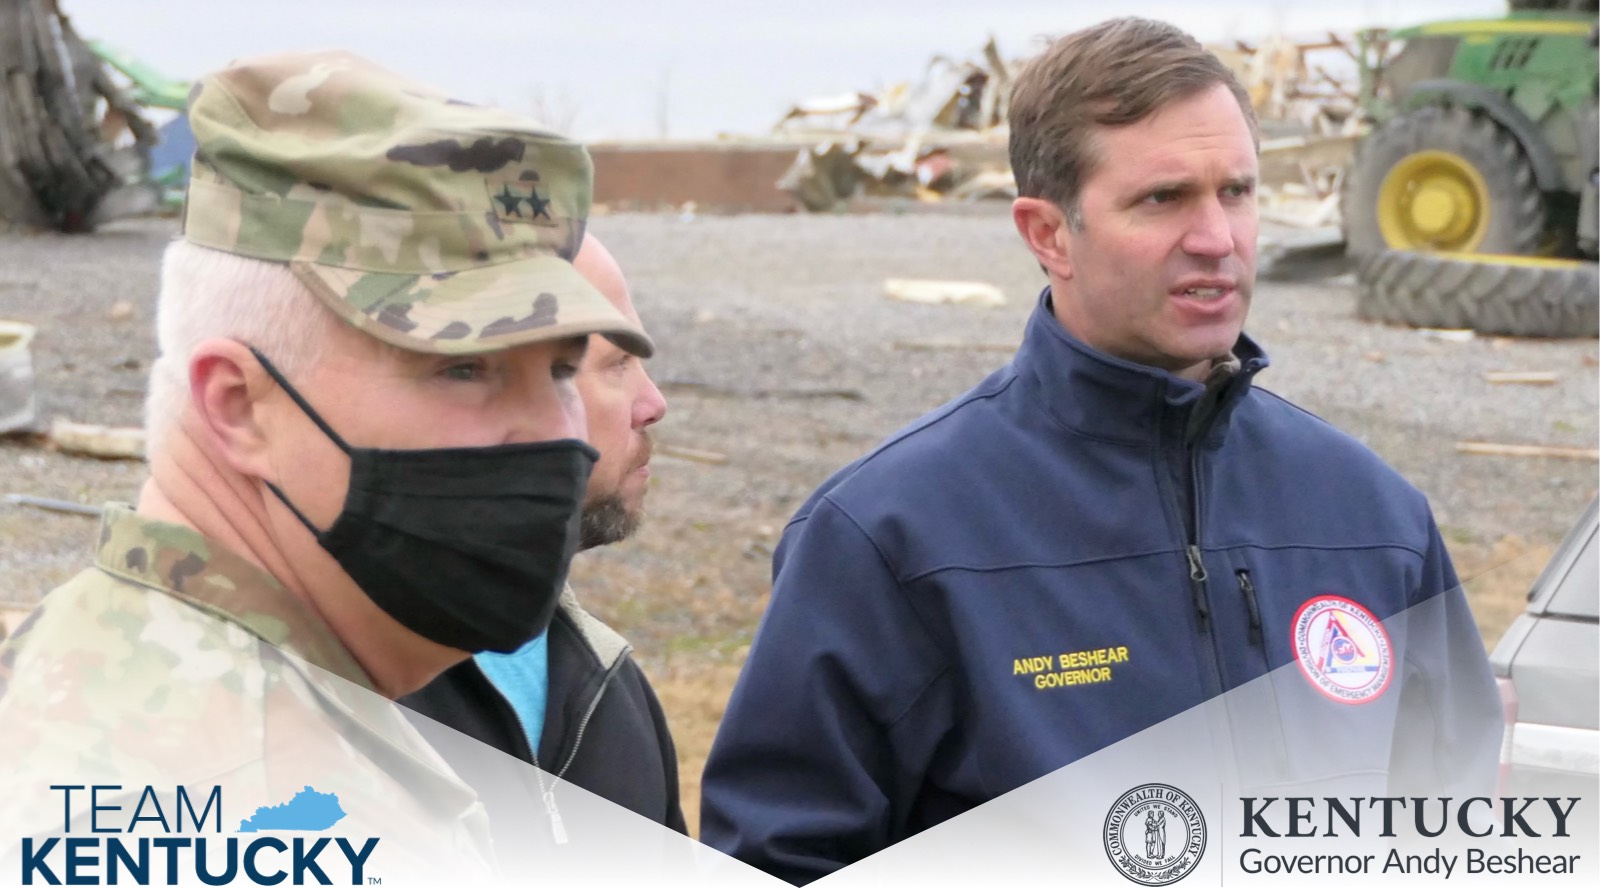 Governor of Kentucky, Andy Beshear, stands with two men, one wearing a military uniform, with tractors in the background.